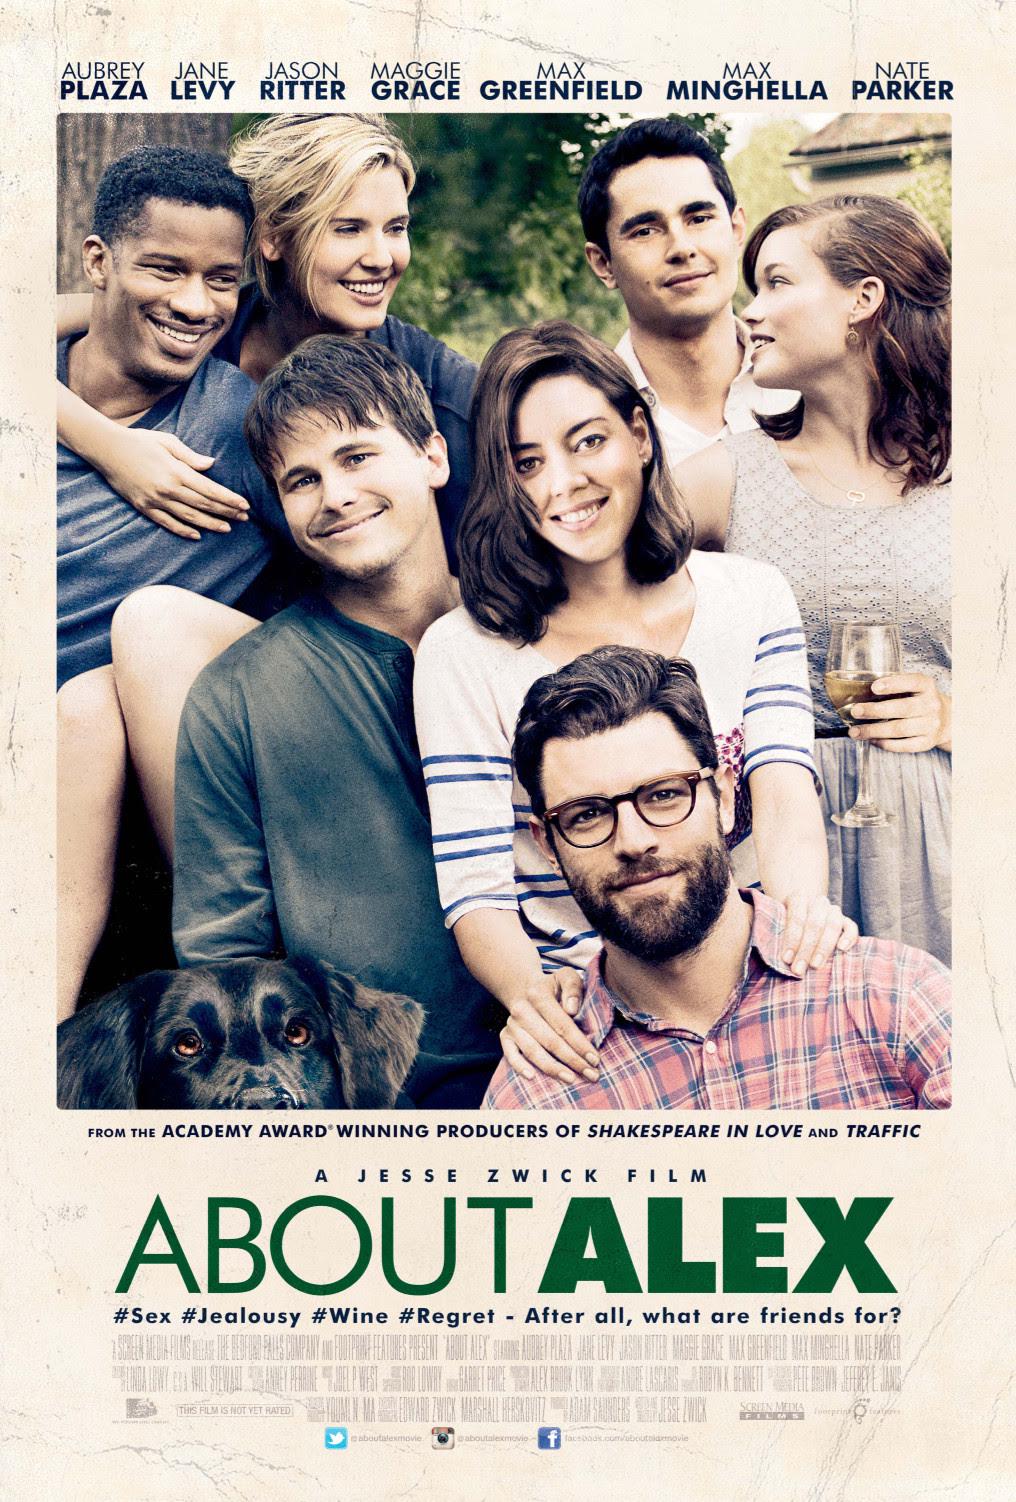 About Alex Movie Review